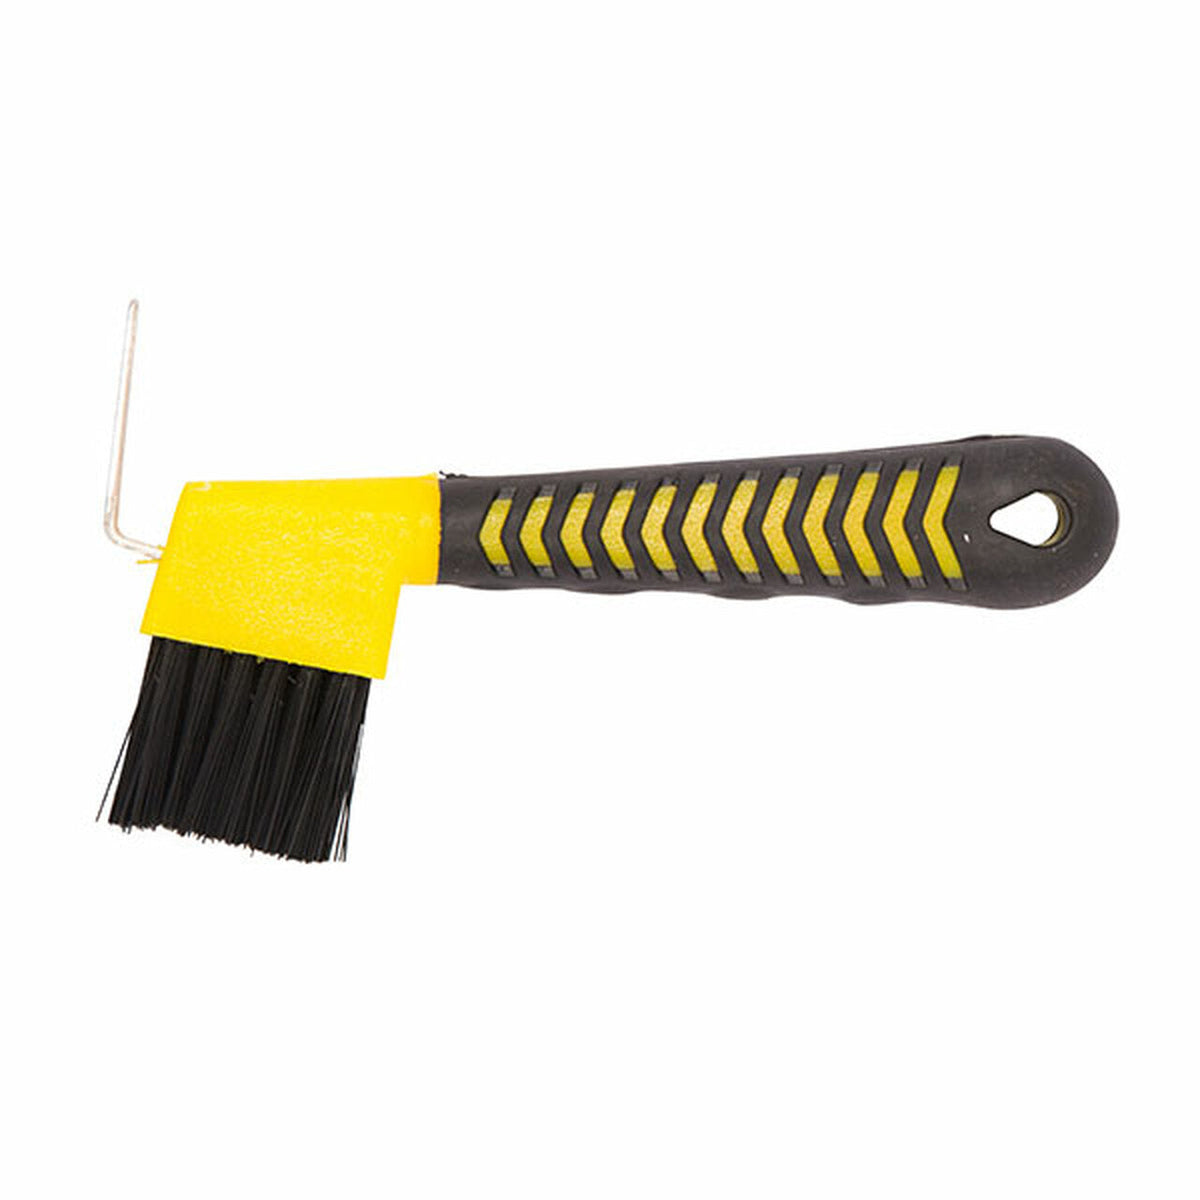 Side view of yellow hoof pick with black shaped handle and bristles.